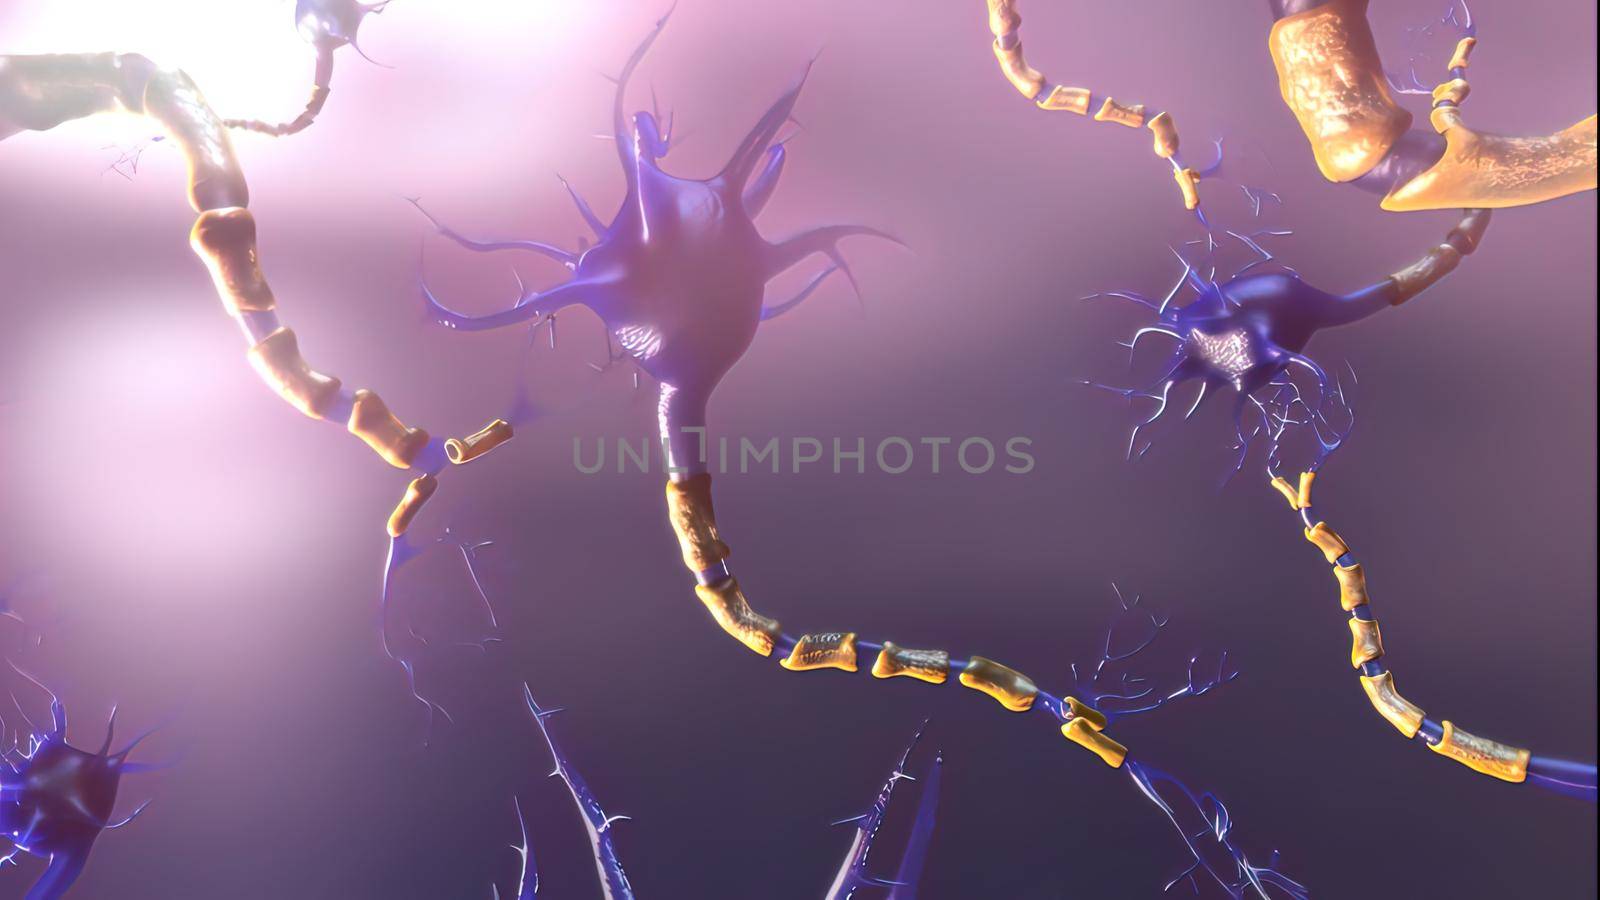 Functionality of neurons consisting of cell body, dendrites and an axon 3d illustration